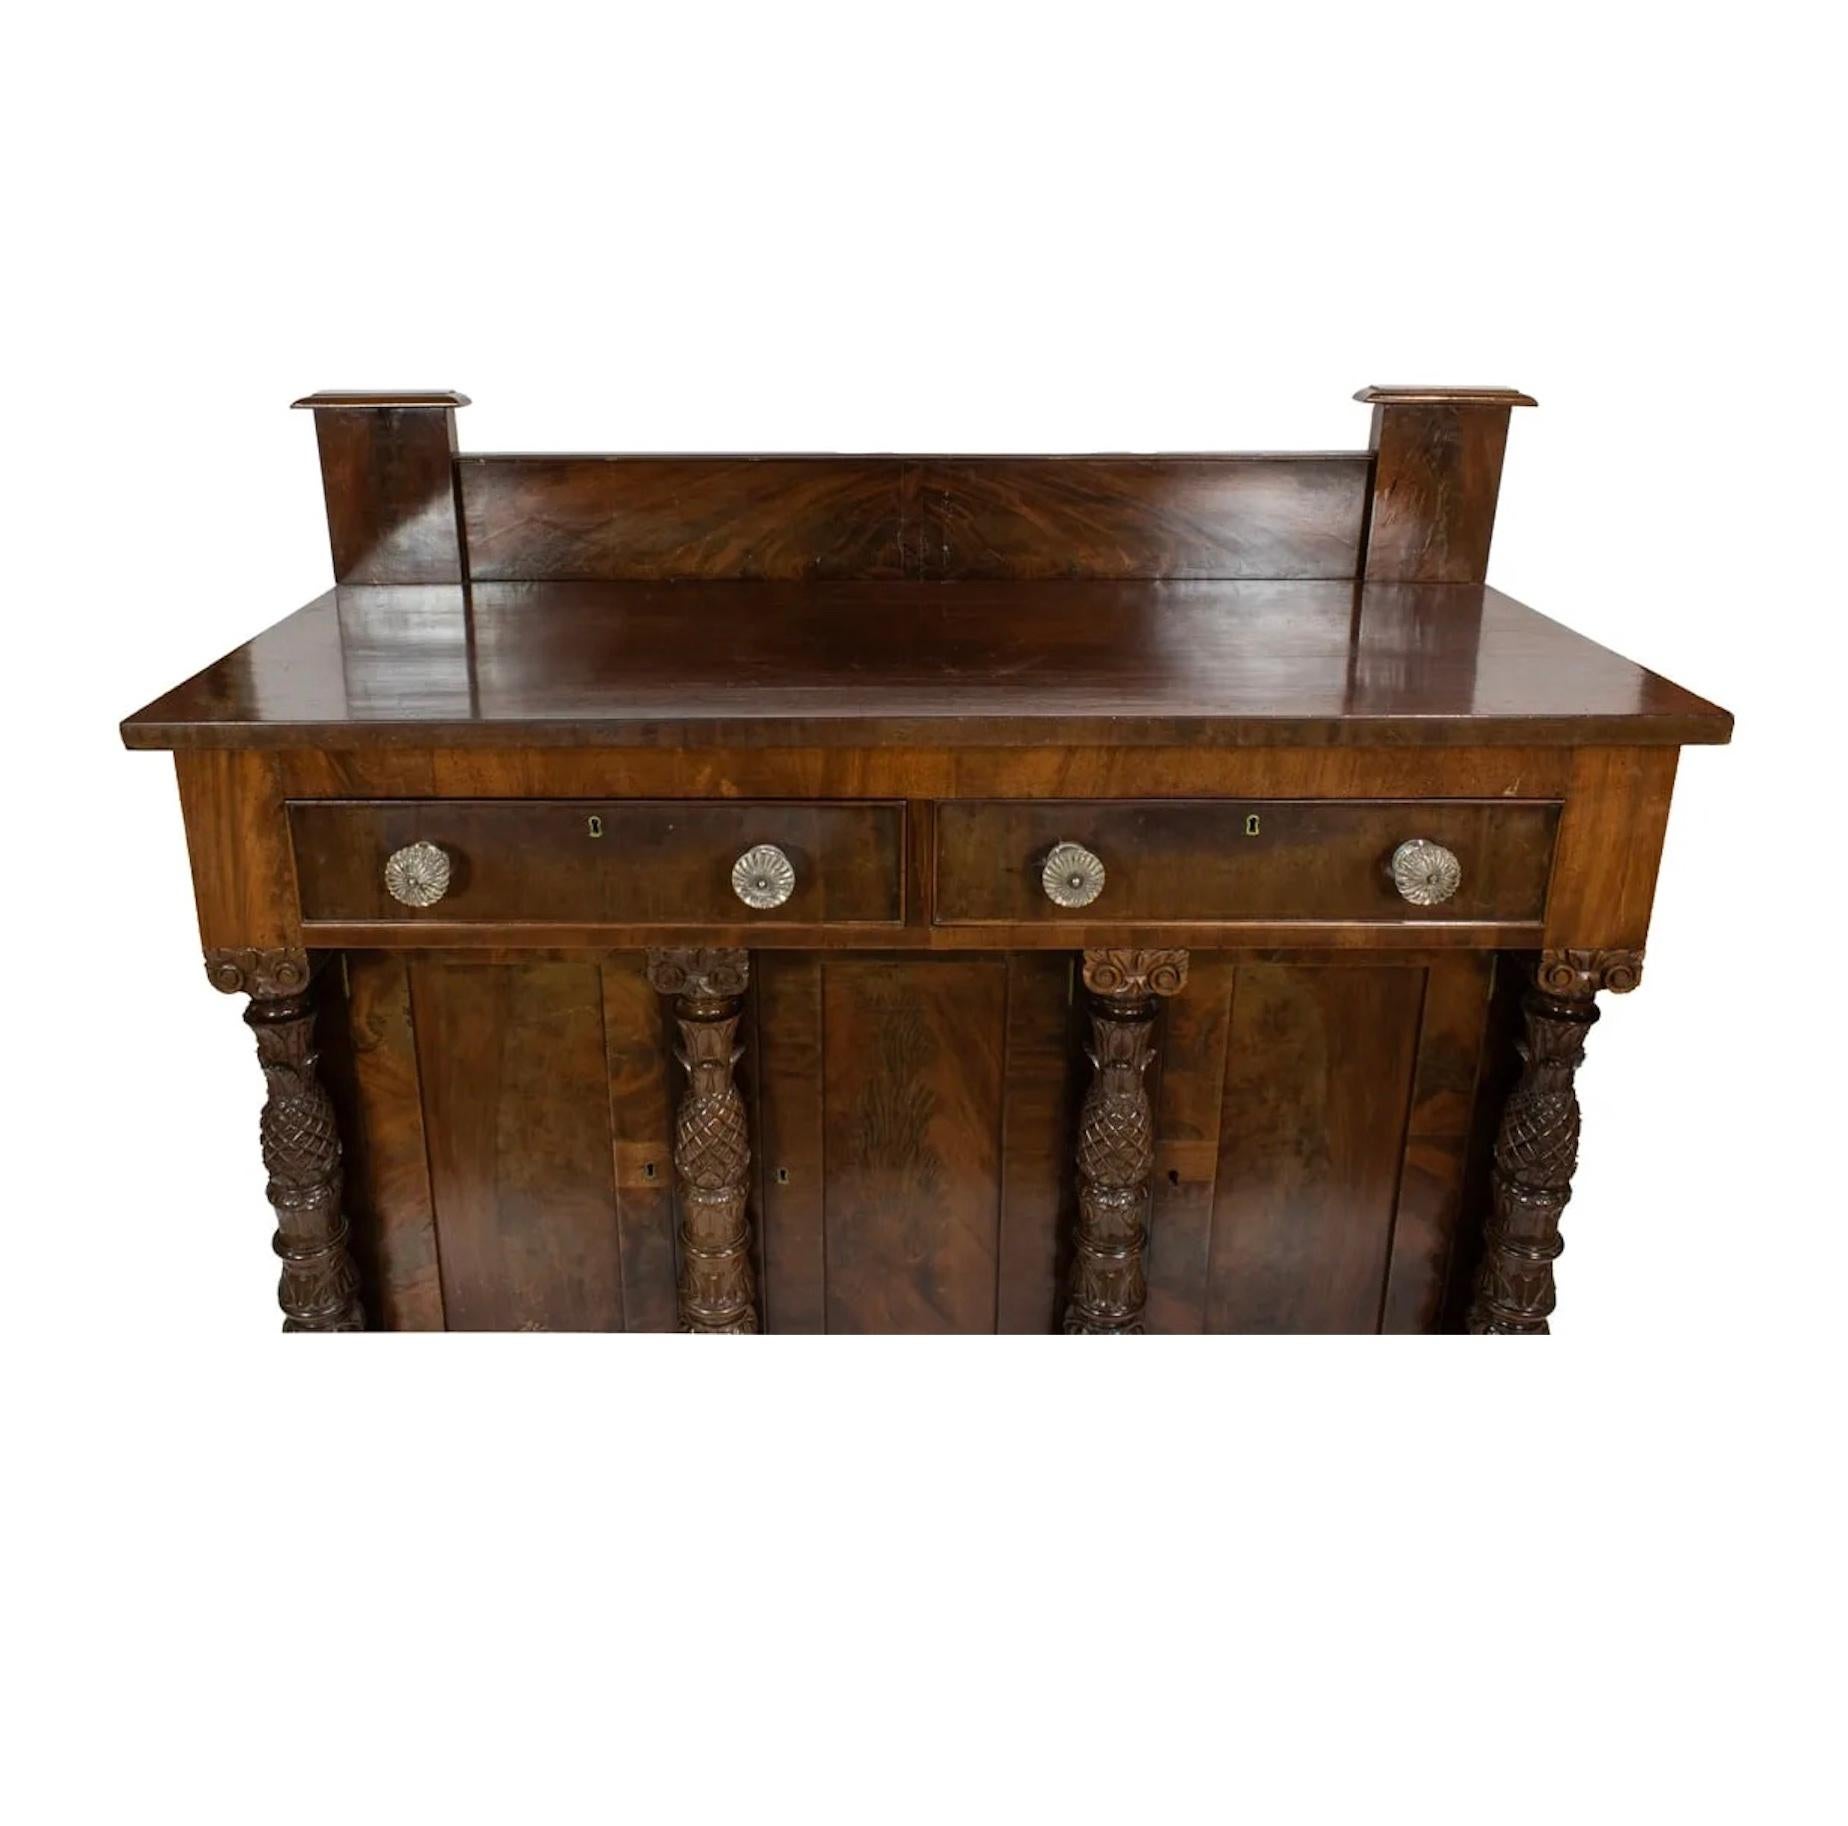 200 + Year Old Antique Circa 1800 American Federal Mahogany Sideboard in very good original condition with original glass pulls and original finish. The recessed back splash flanked by columnar form end supports, over the rectangular top, twin side